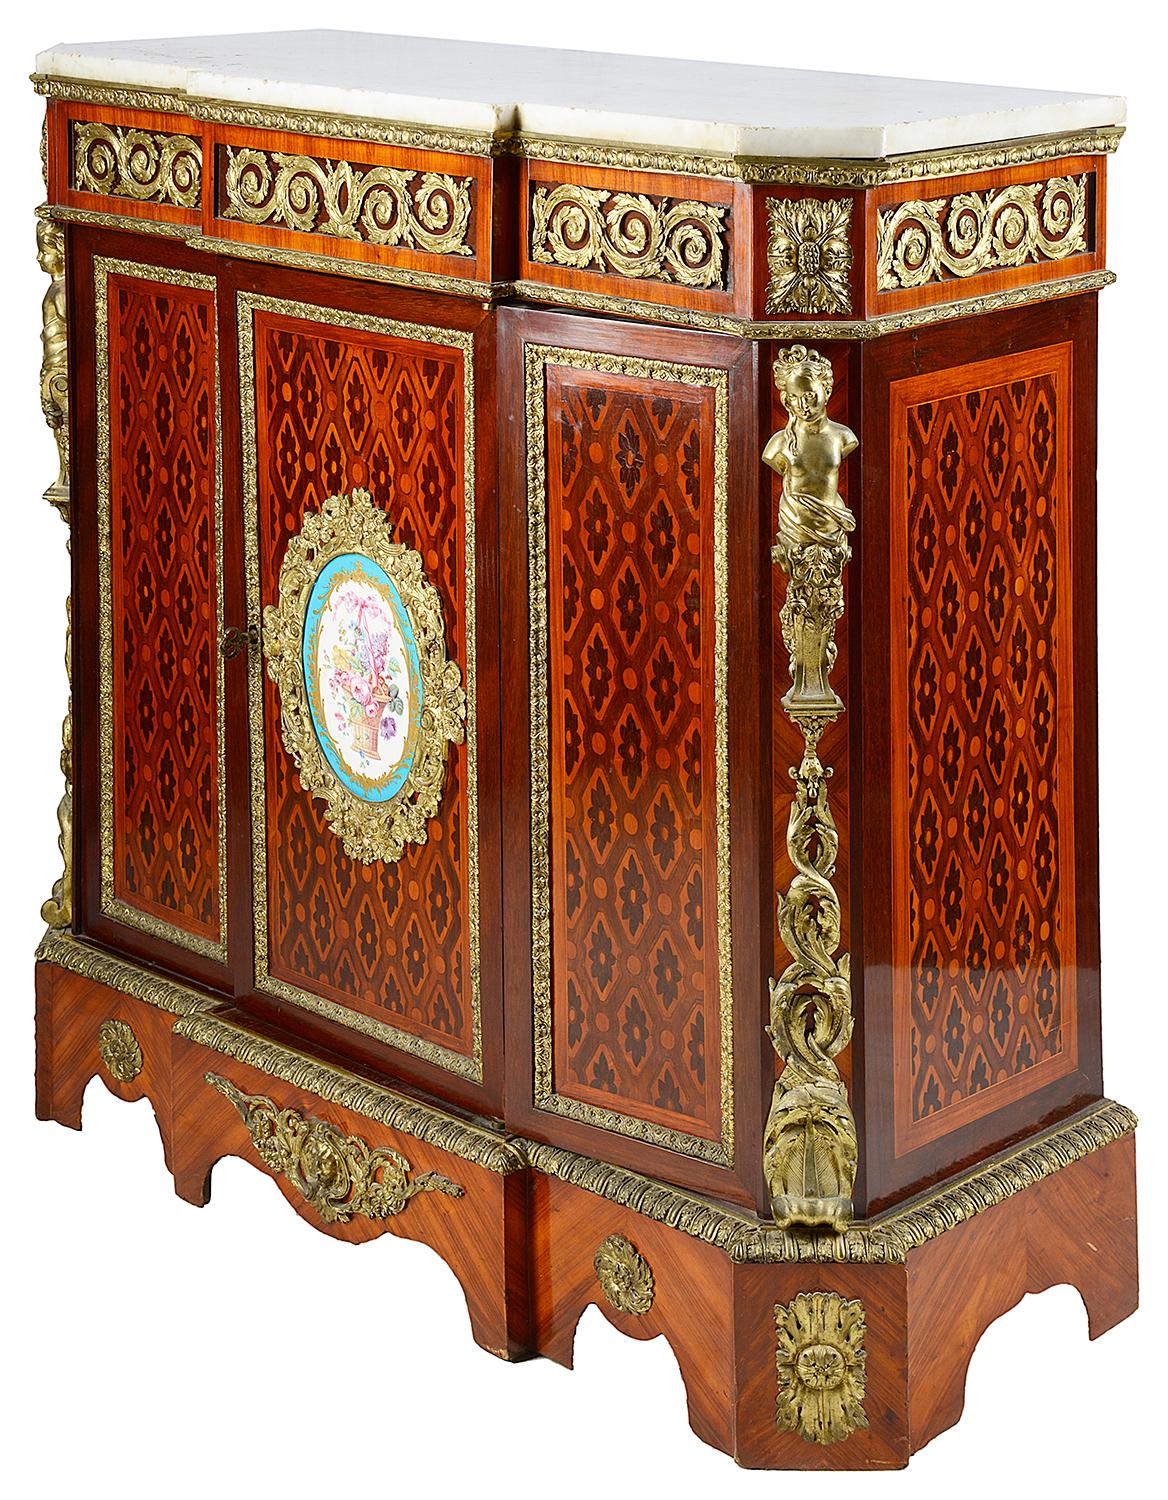 A good quality late 19th century side cabinet, having a white marble top, gilded ormolu scrolling mounts to the frieze, various exotic woods to the parquetry and marquetry inlay, a Sevres style porcelain plaque with flowers in a basket to the